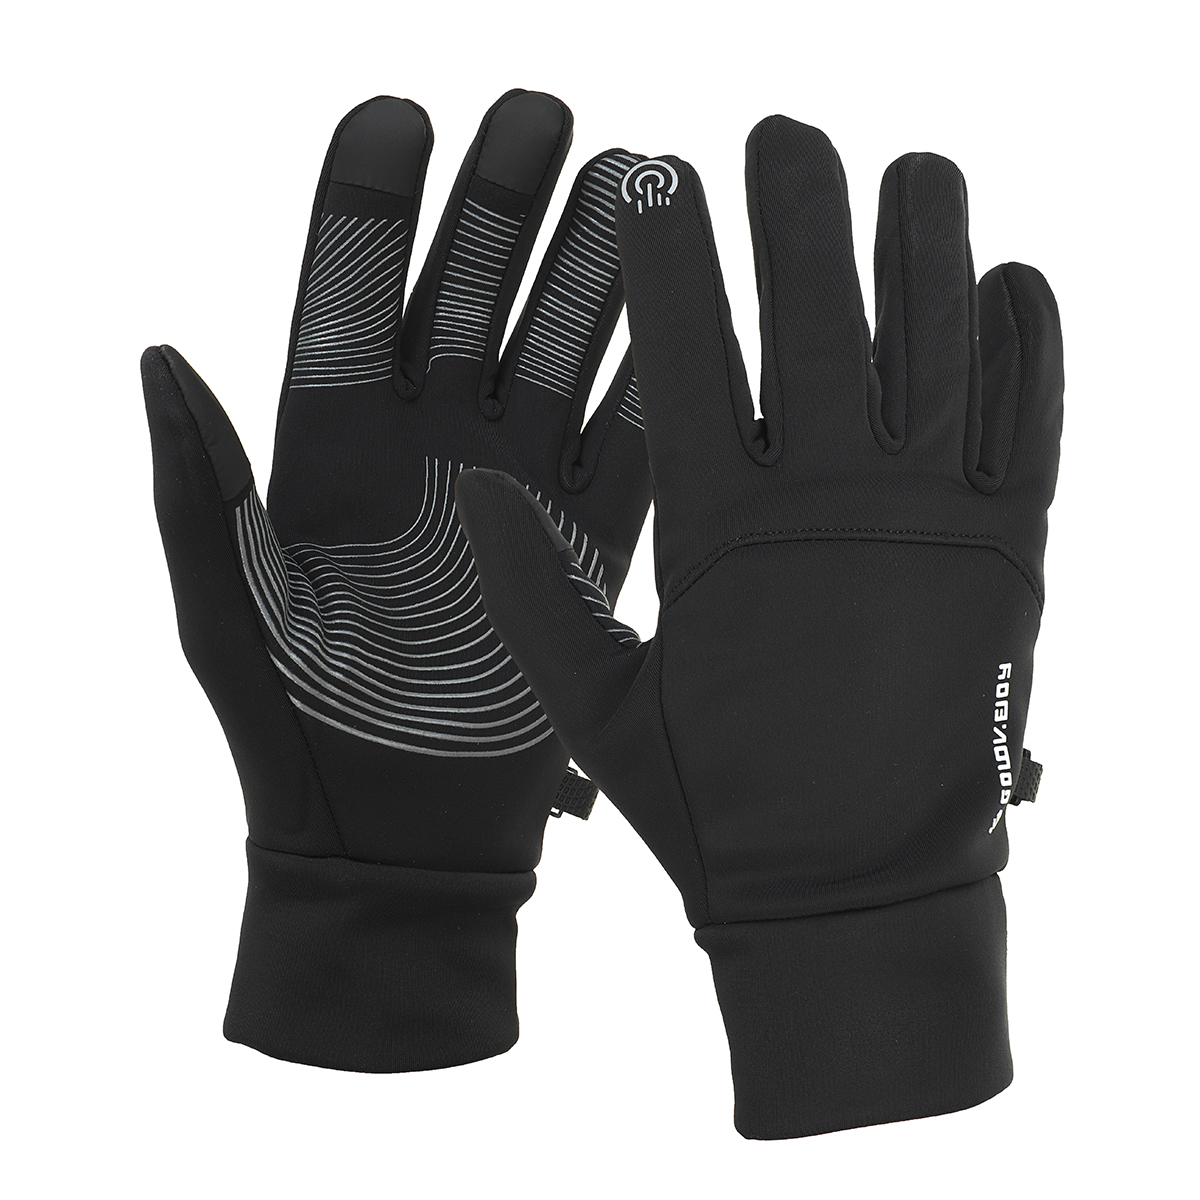 Winter-Warm-Touch-Screen-Thermal-Gloves-Ski-Snow-Snowboard-Cycling-Waterproof-Winter-Gloves-1921750-1